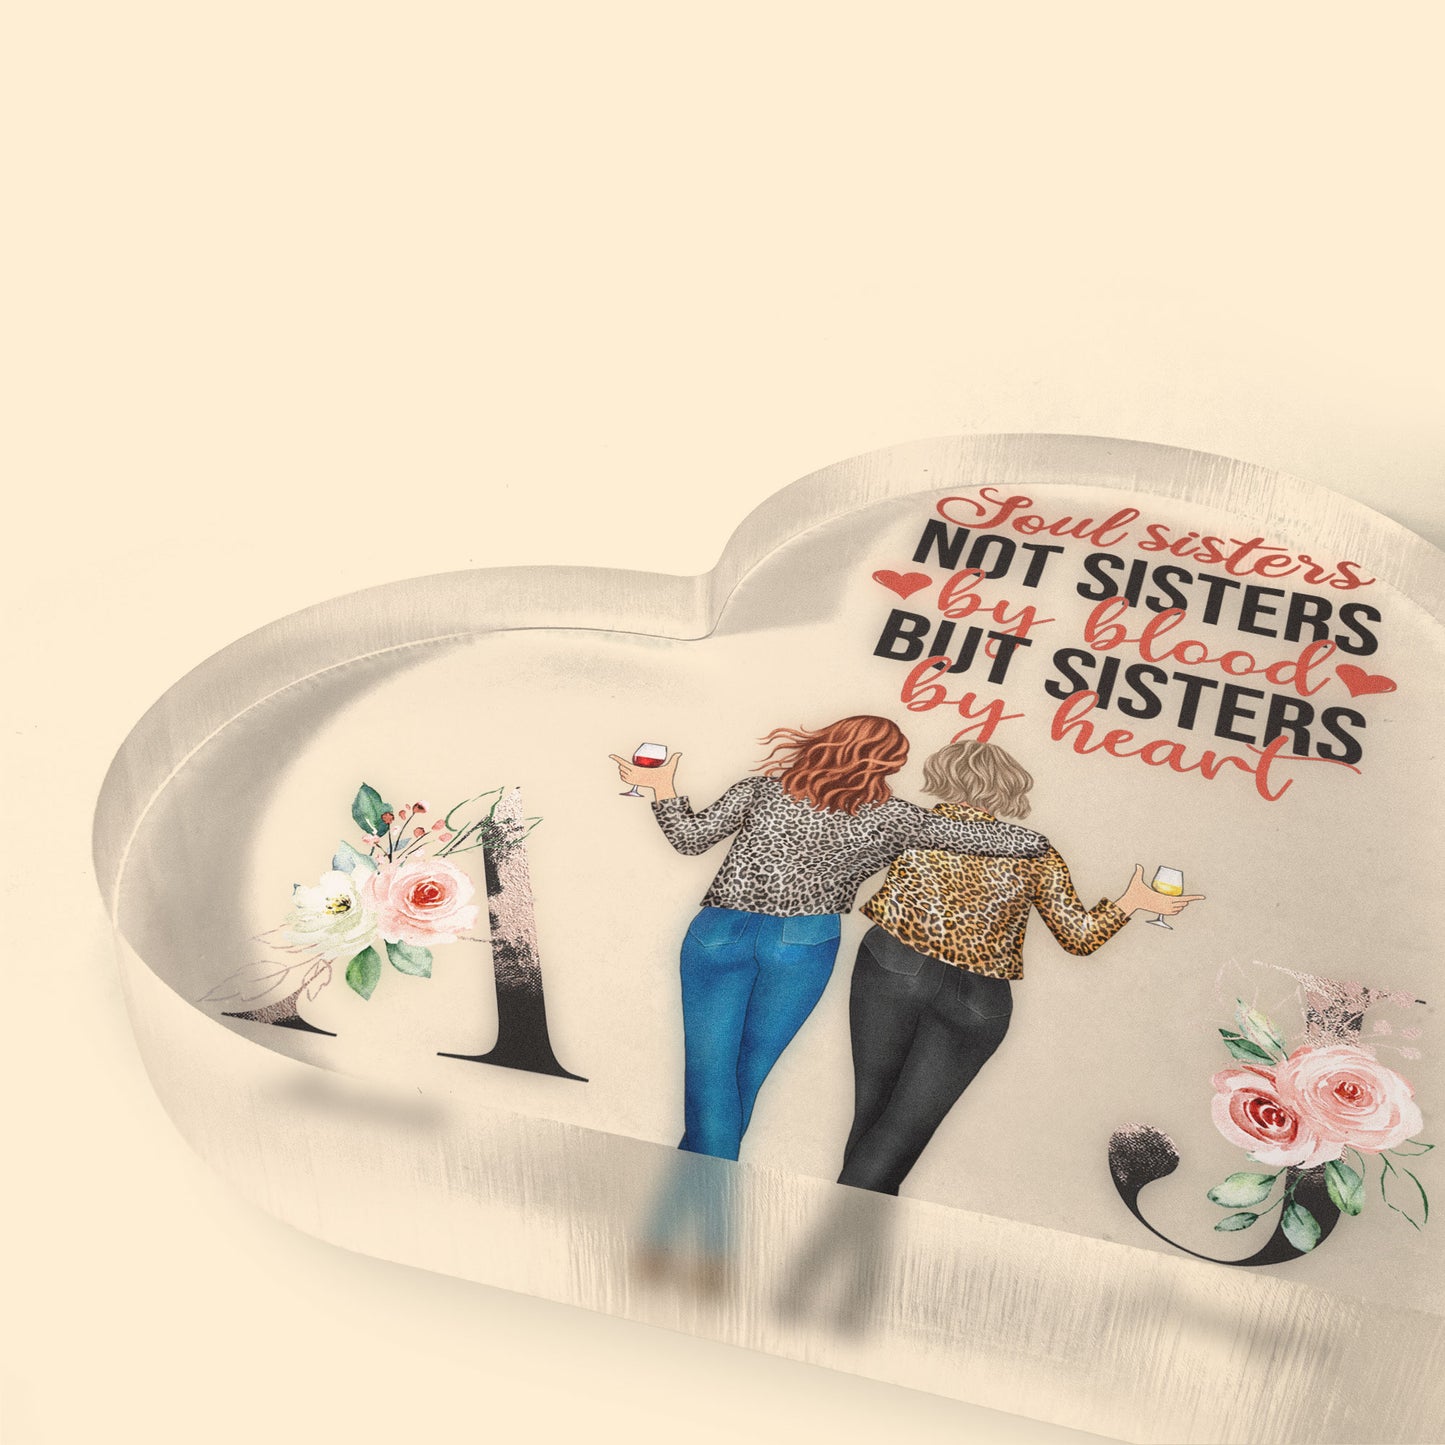 We Are Sisters By Heart - Personalized Heart Shaped Acrylic Plaque - Birthday Gift For Her, Bff, Besties, Soul Sisters